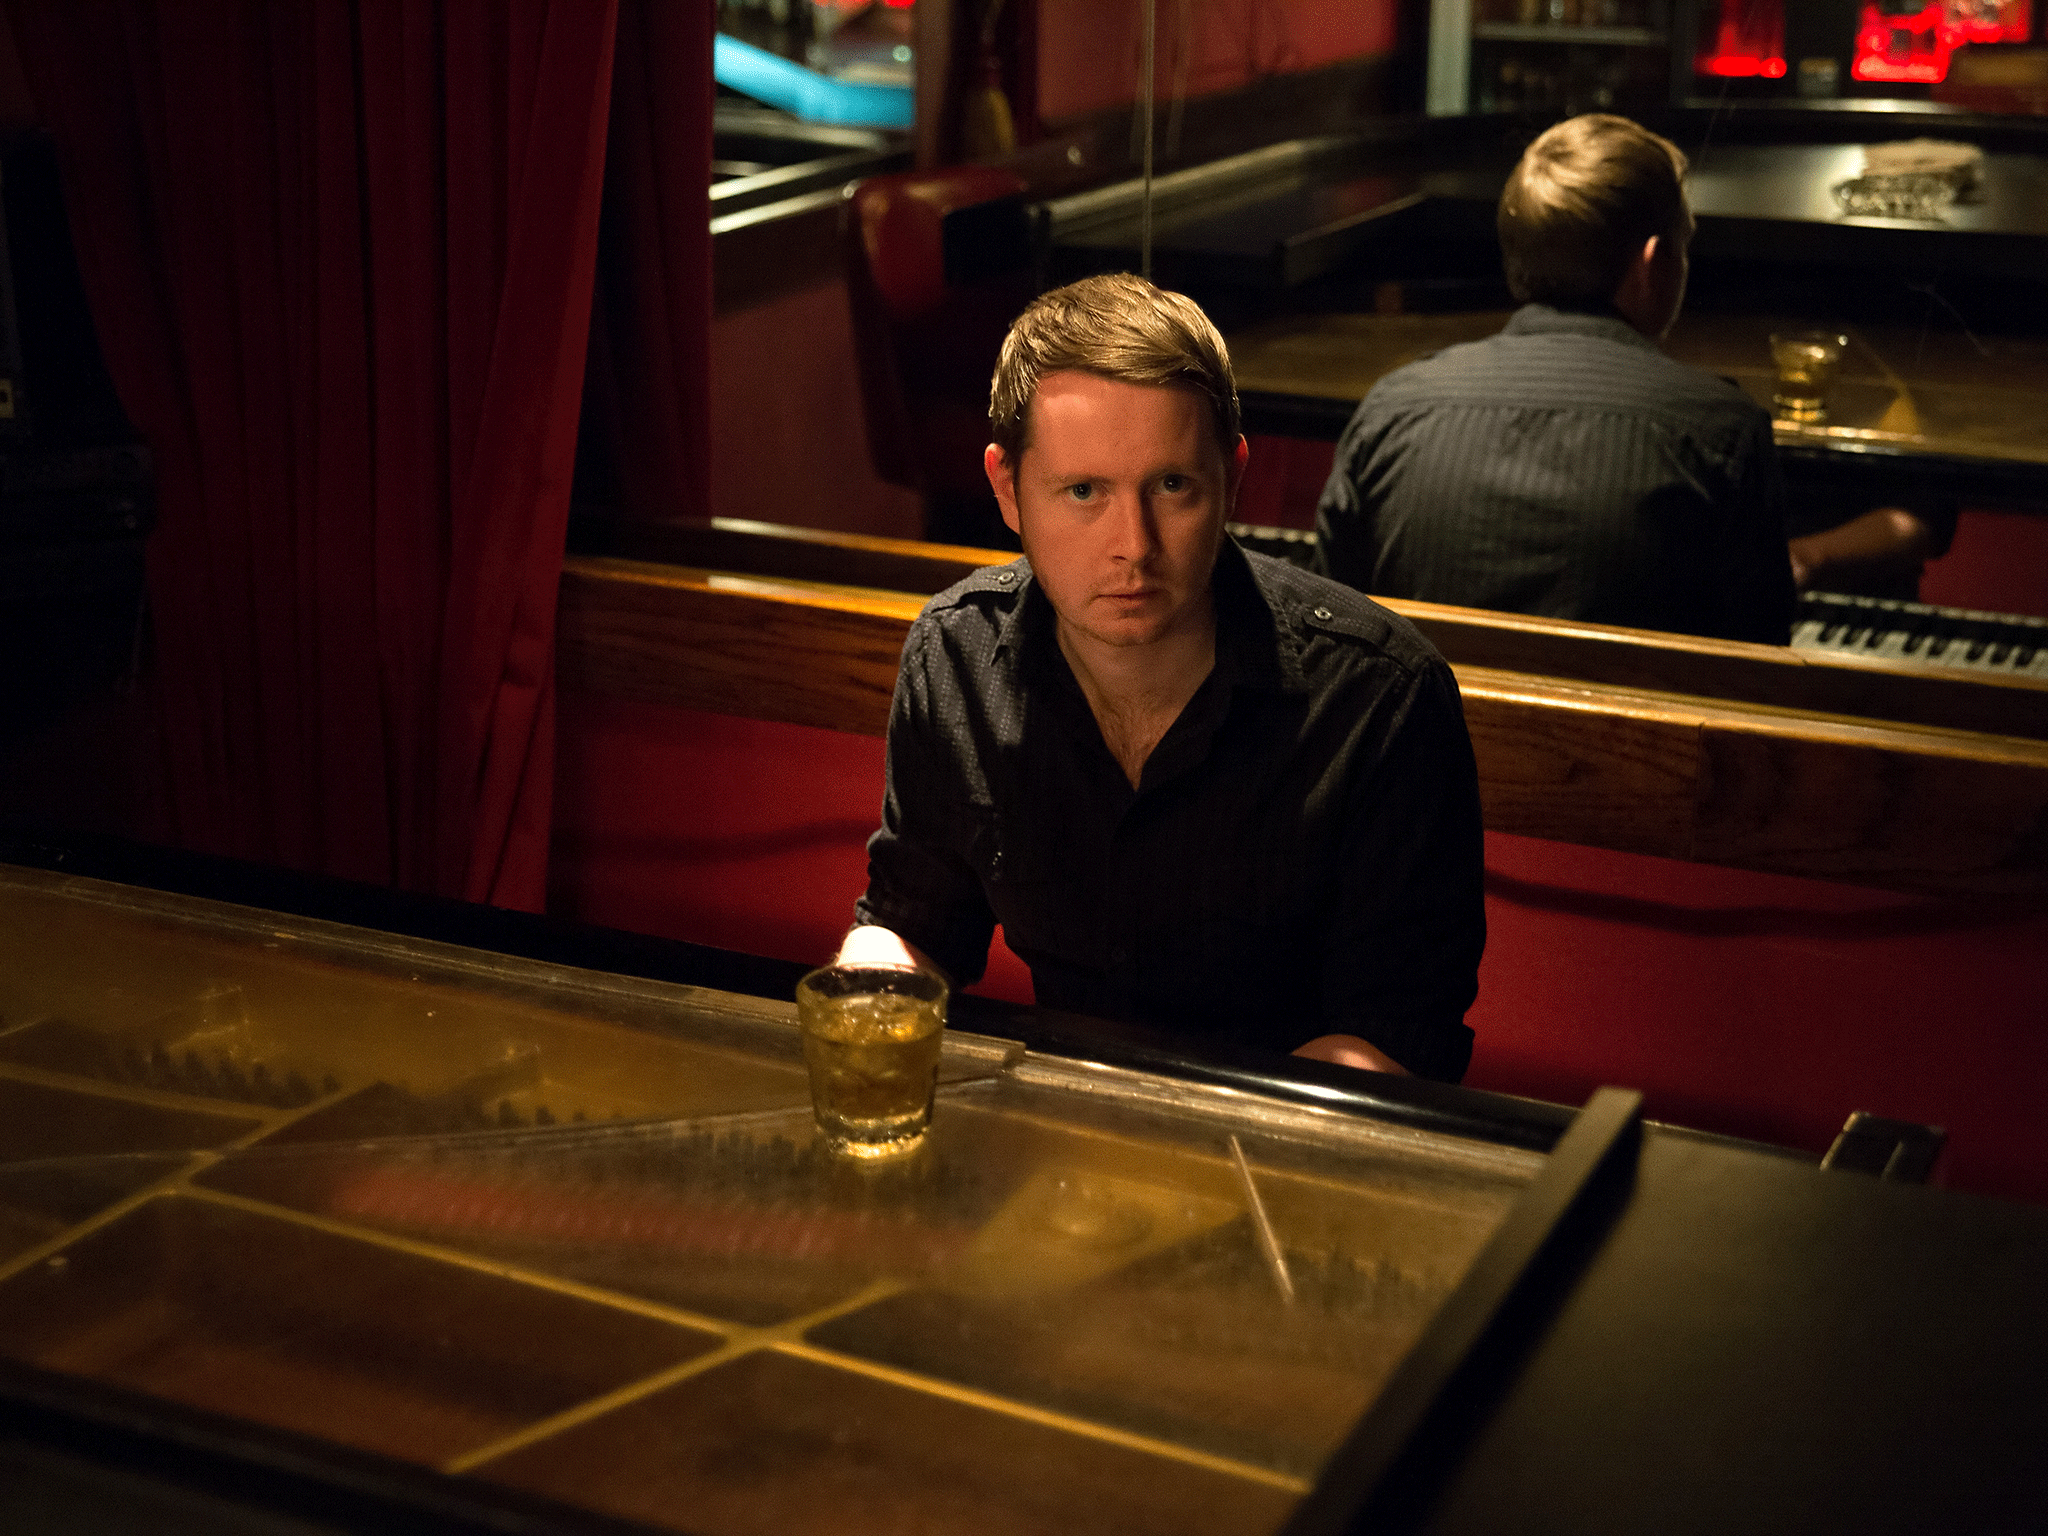 Solitary man: John Fullbright, who comes from the same town as Woody Guthrie 